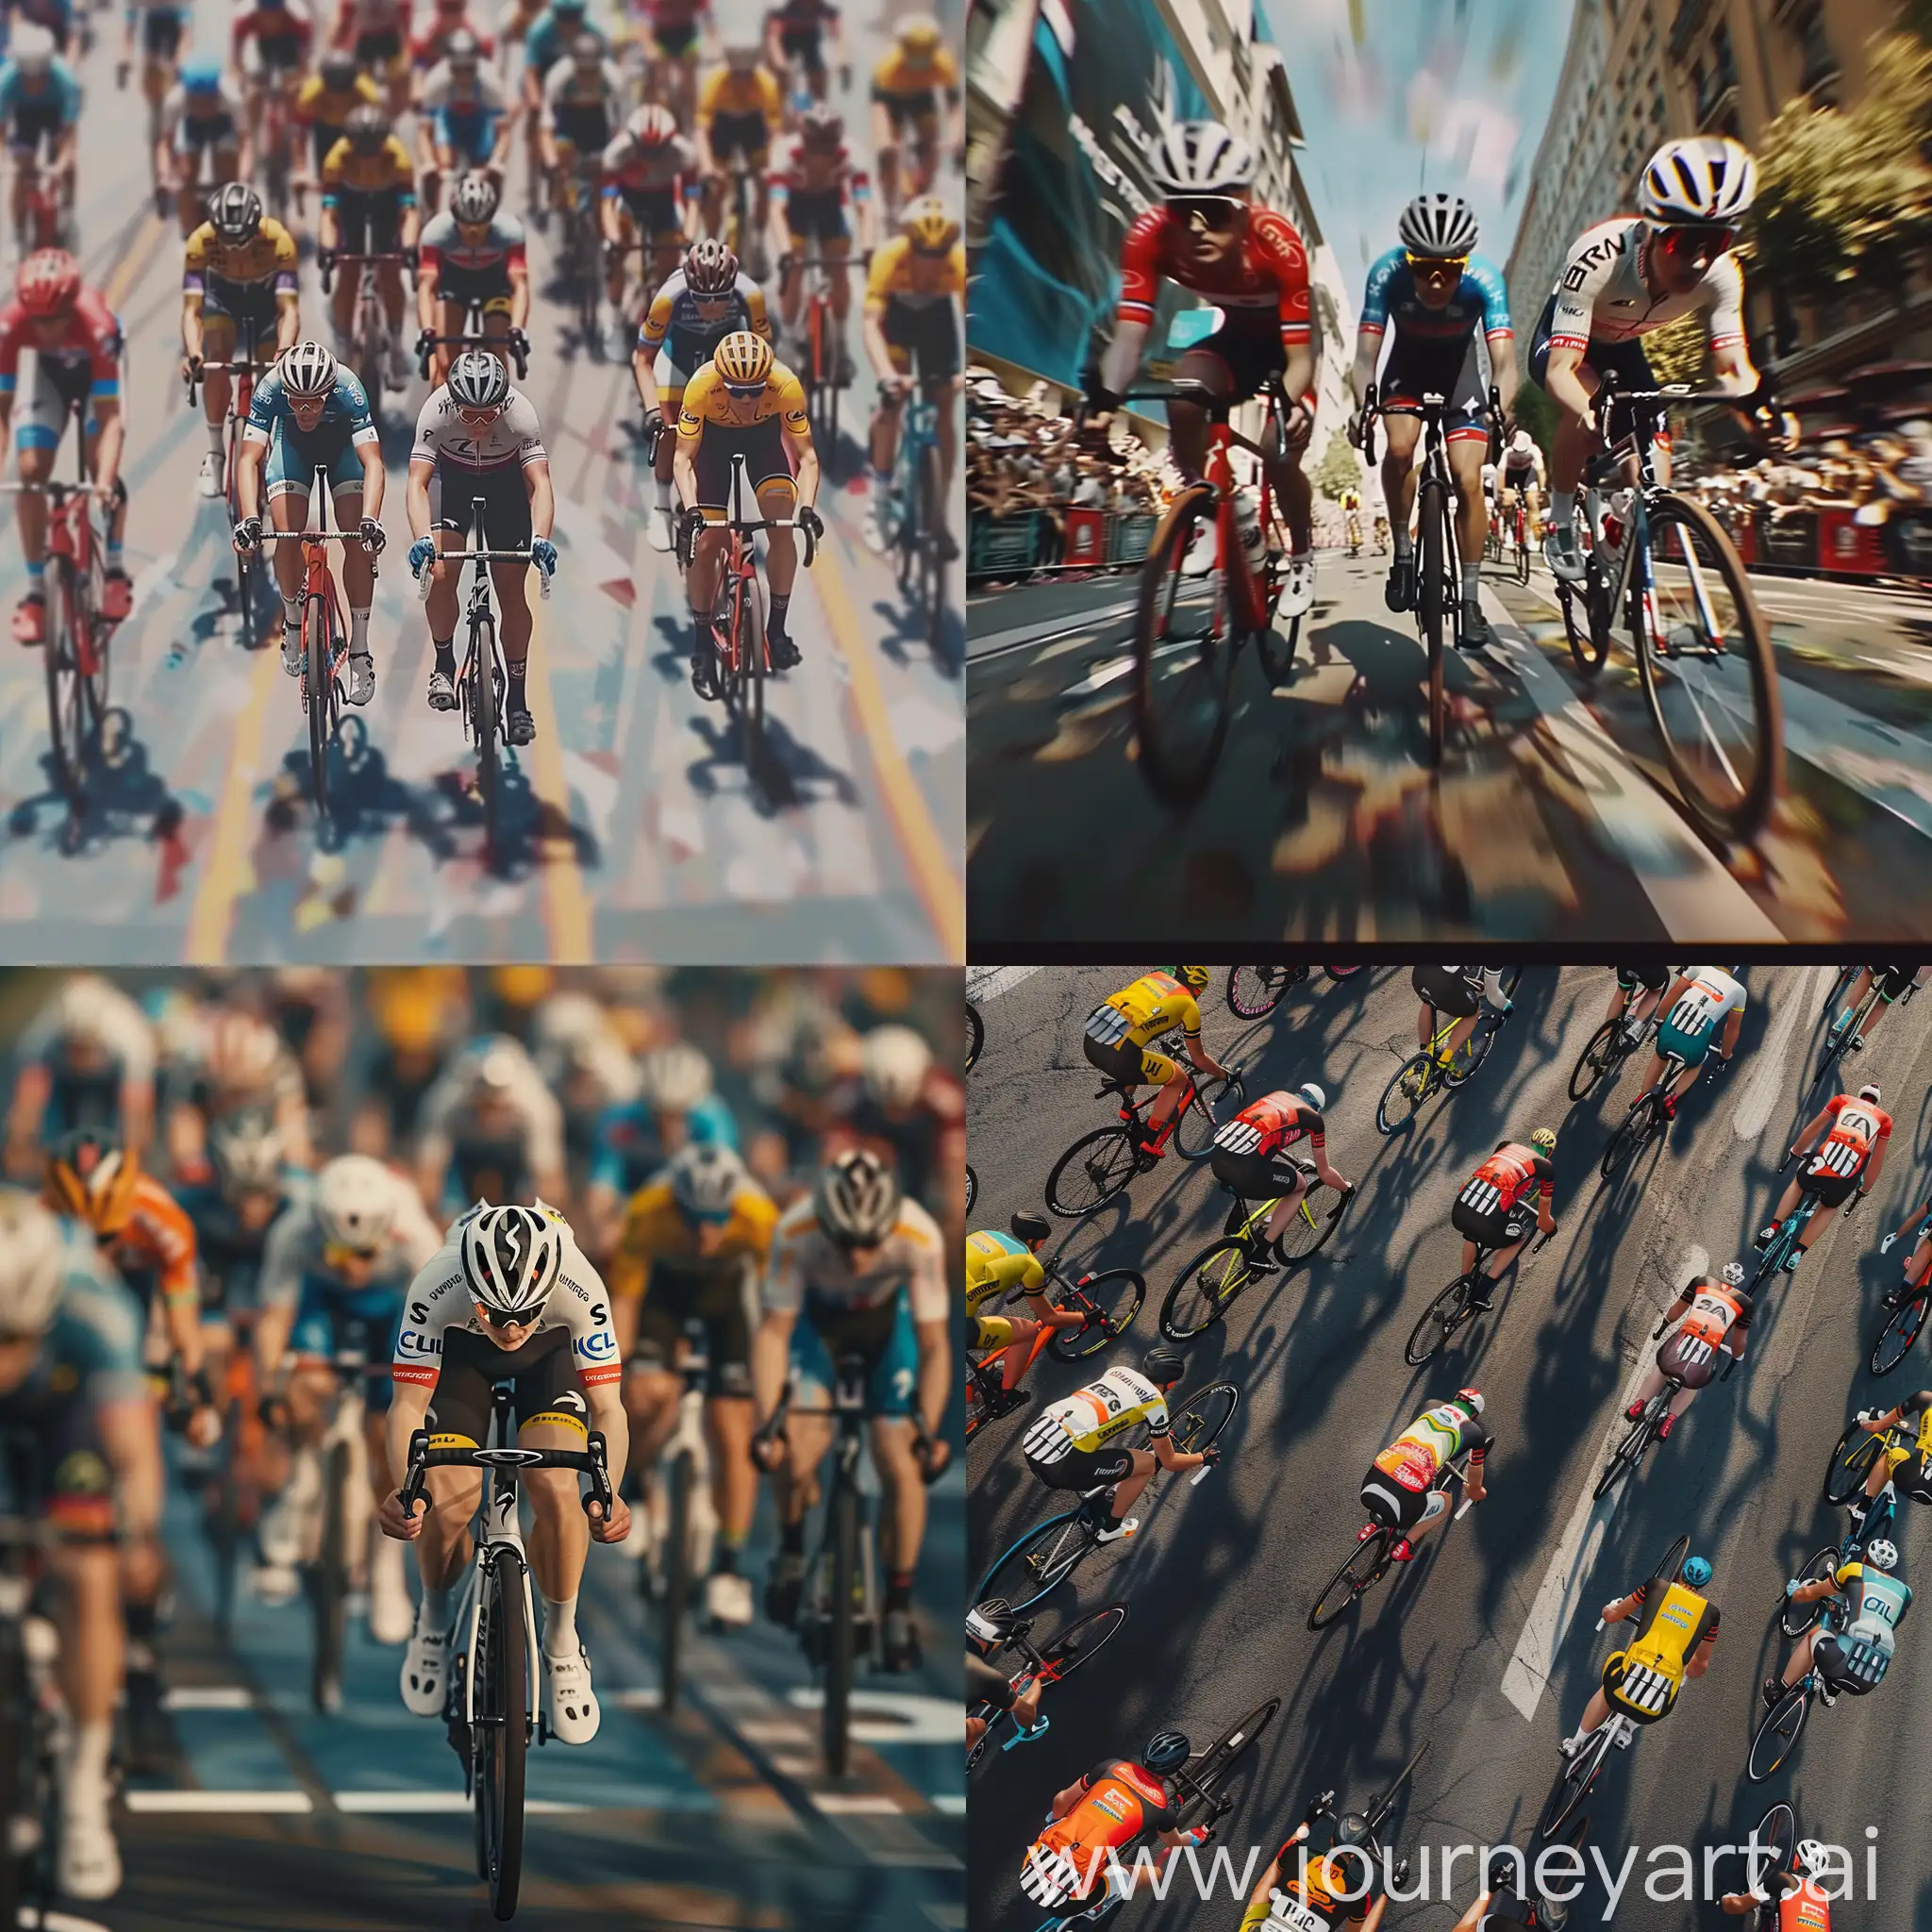 Professional-Cycling-Race-A-Dynamic-Spectacle-from-Every-Angle